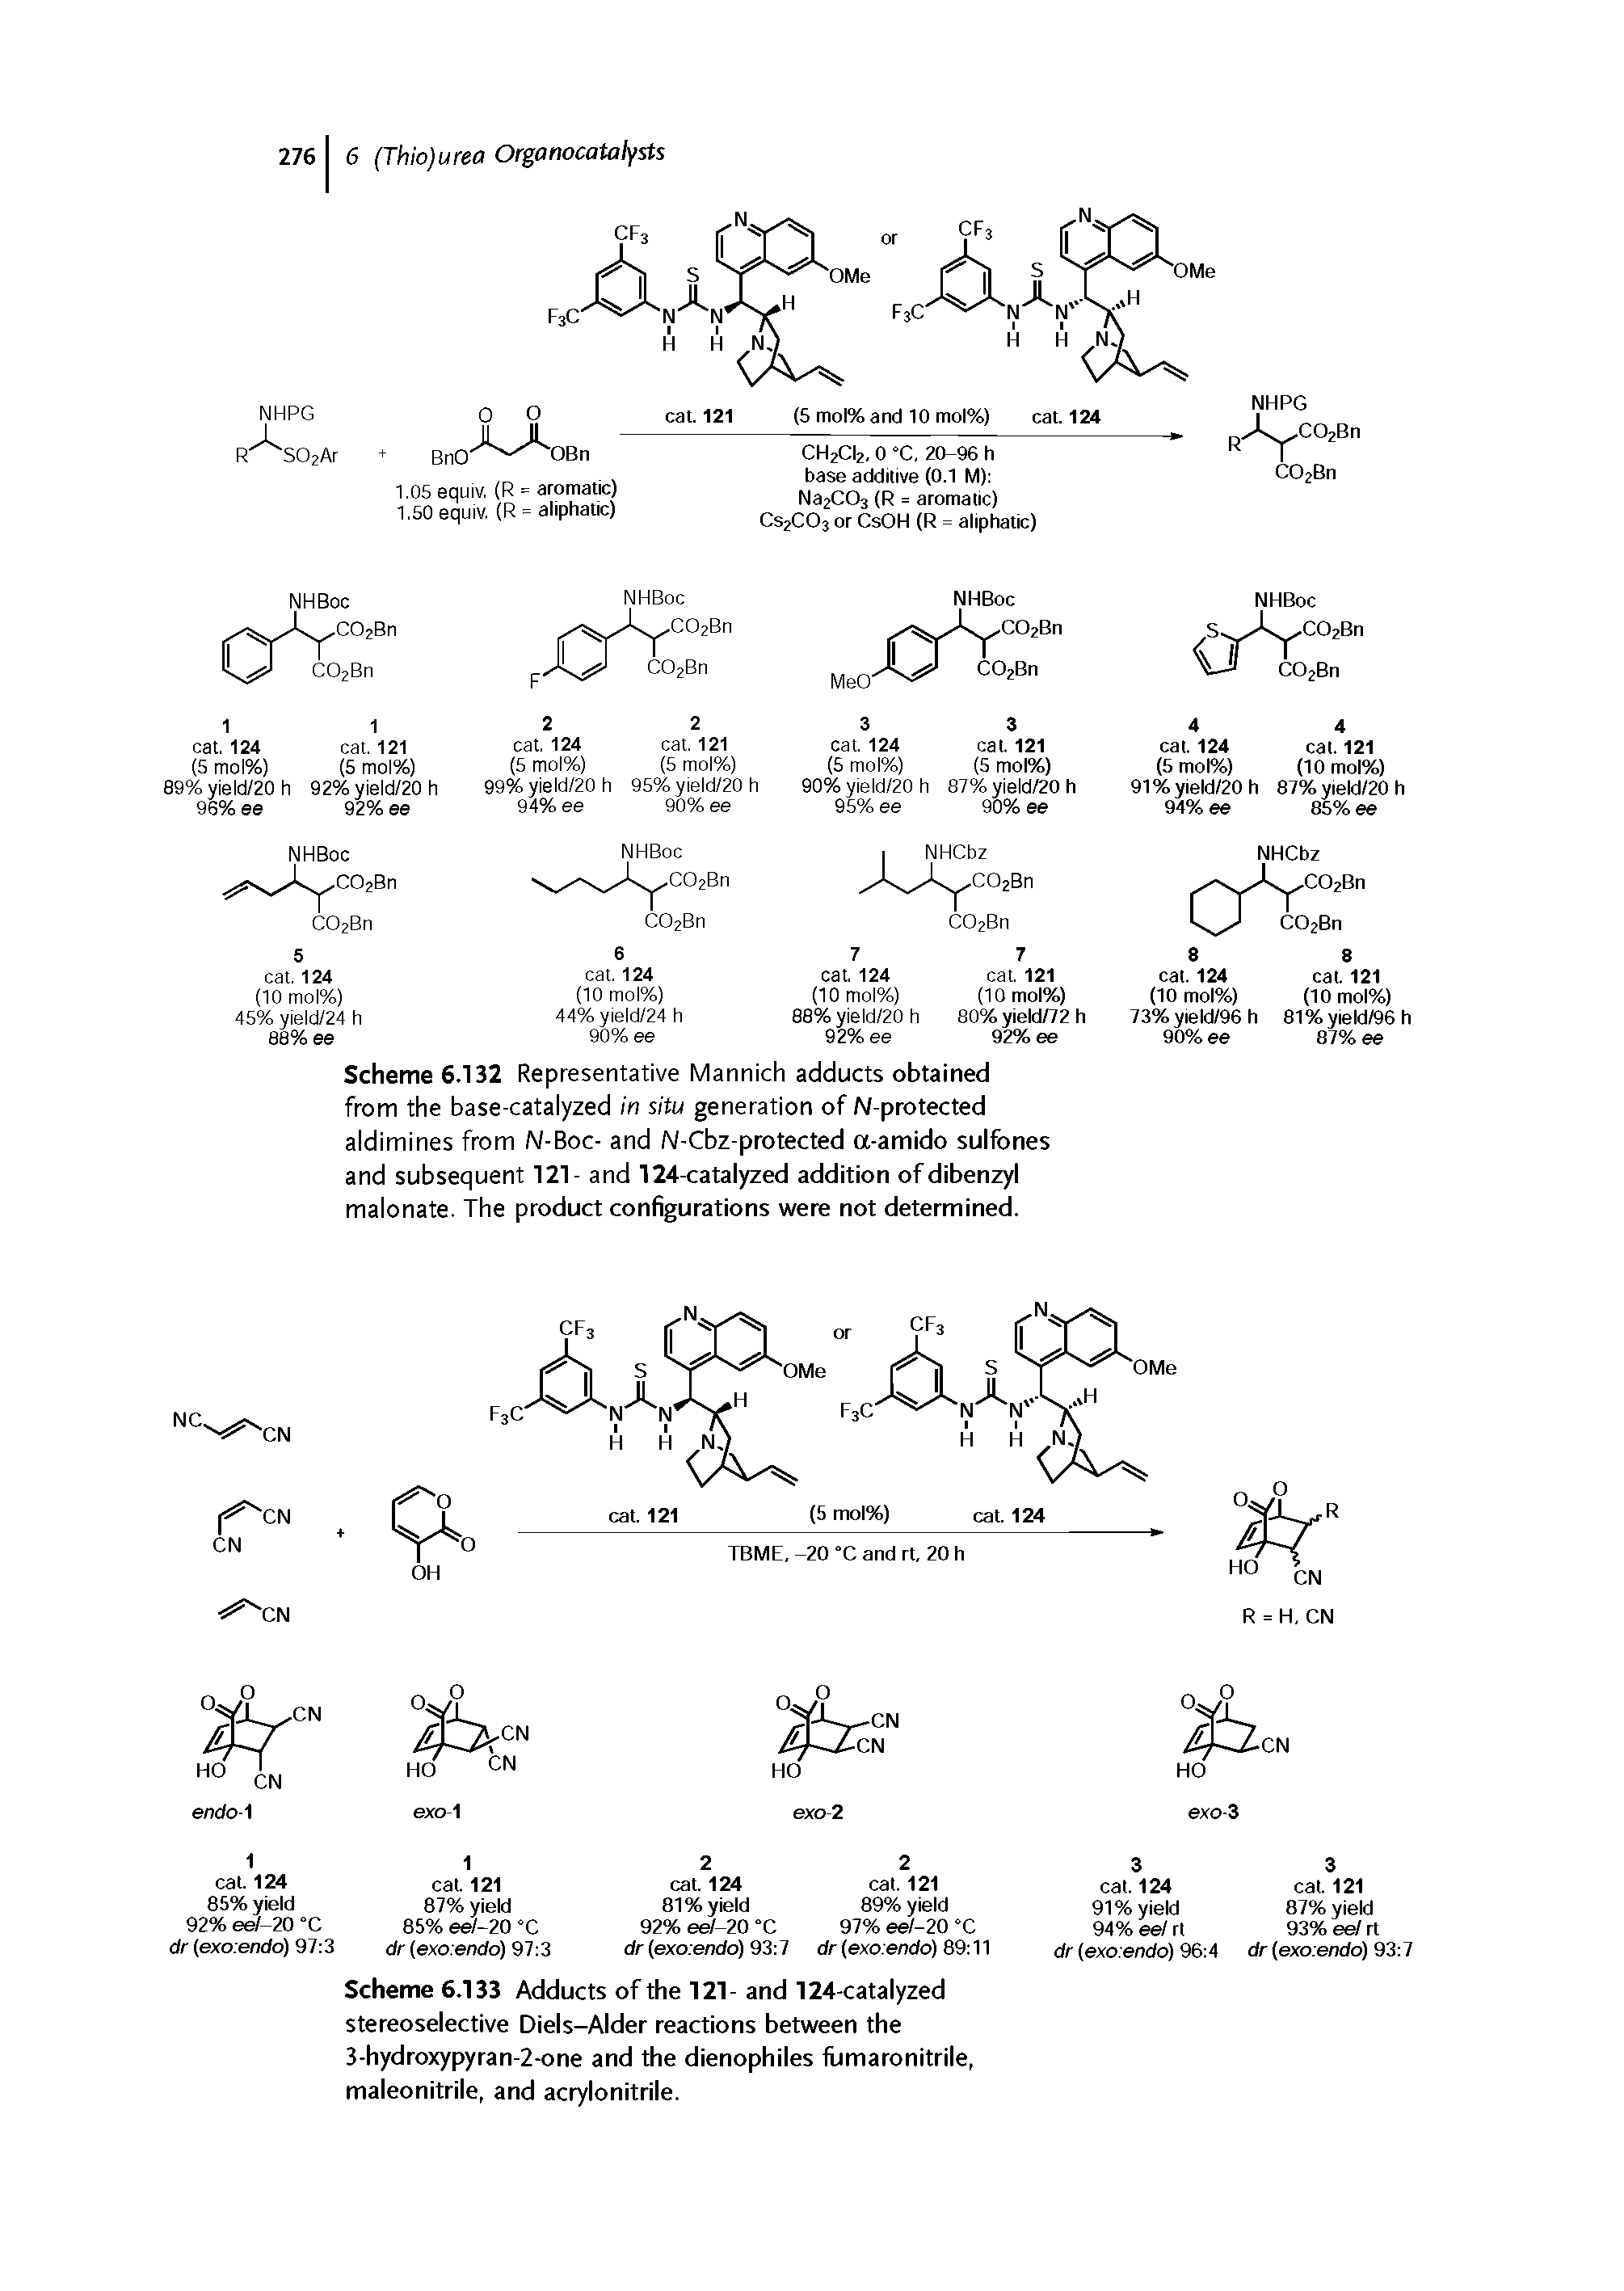 Scheme 6.132 Representative Mannich adducts obtained from the base-catalyzed in situ generation of N-protected aldimines from N-Boc- and N-Cbz-protected a-amido sulfones and subsequent 121- and 124-catalyzed addition of dibenzyl malonate. The product configurations were not determined.